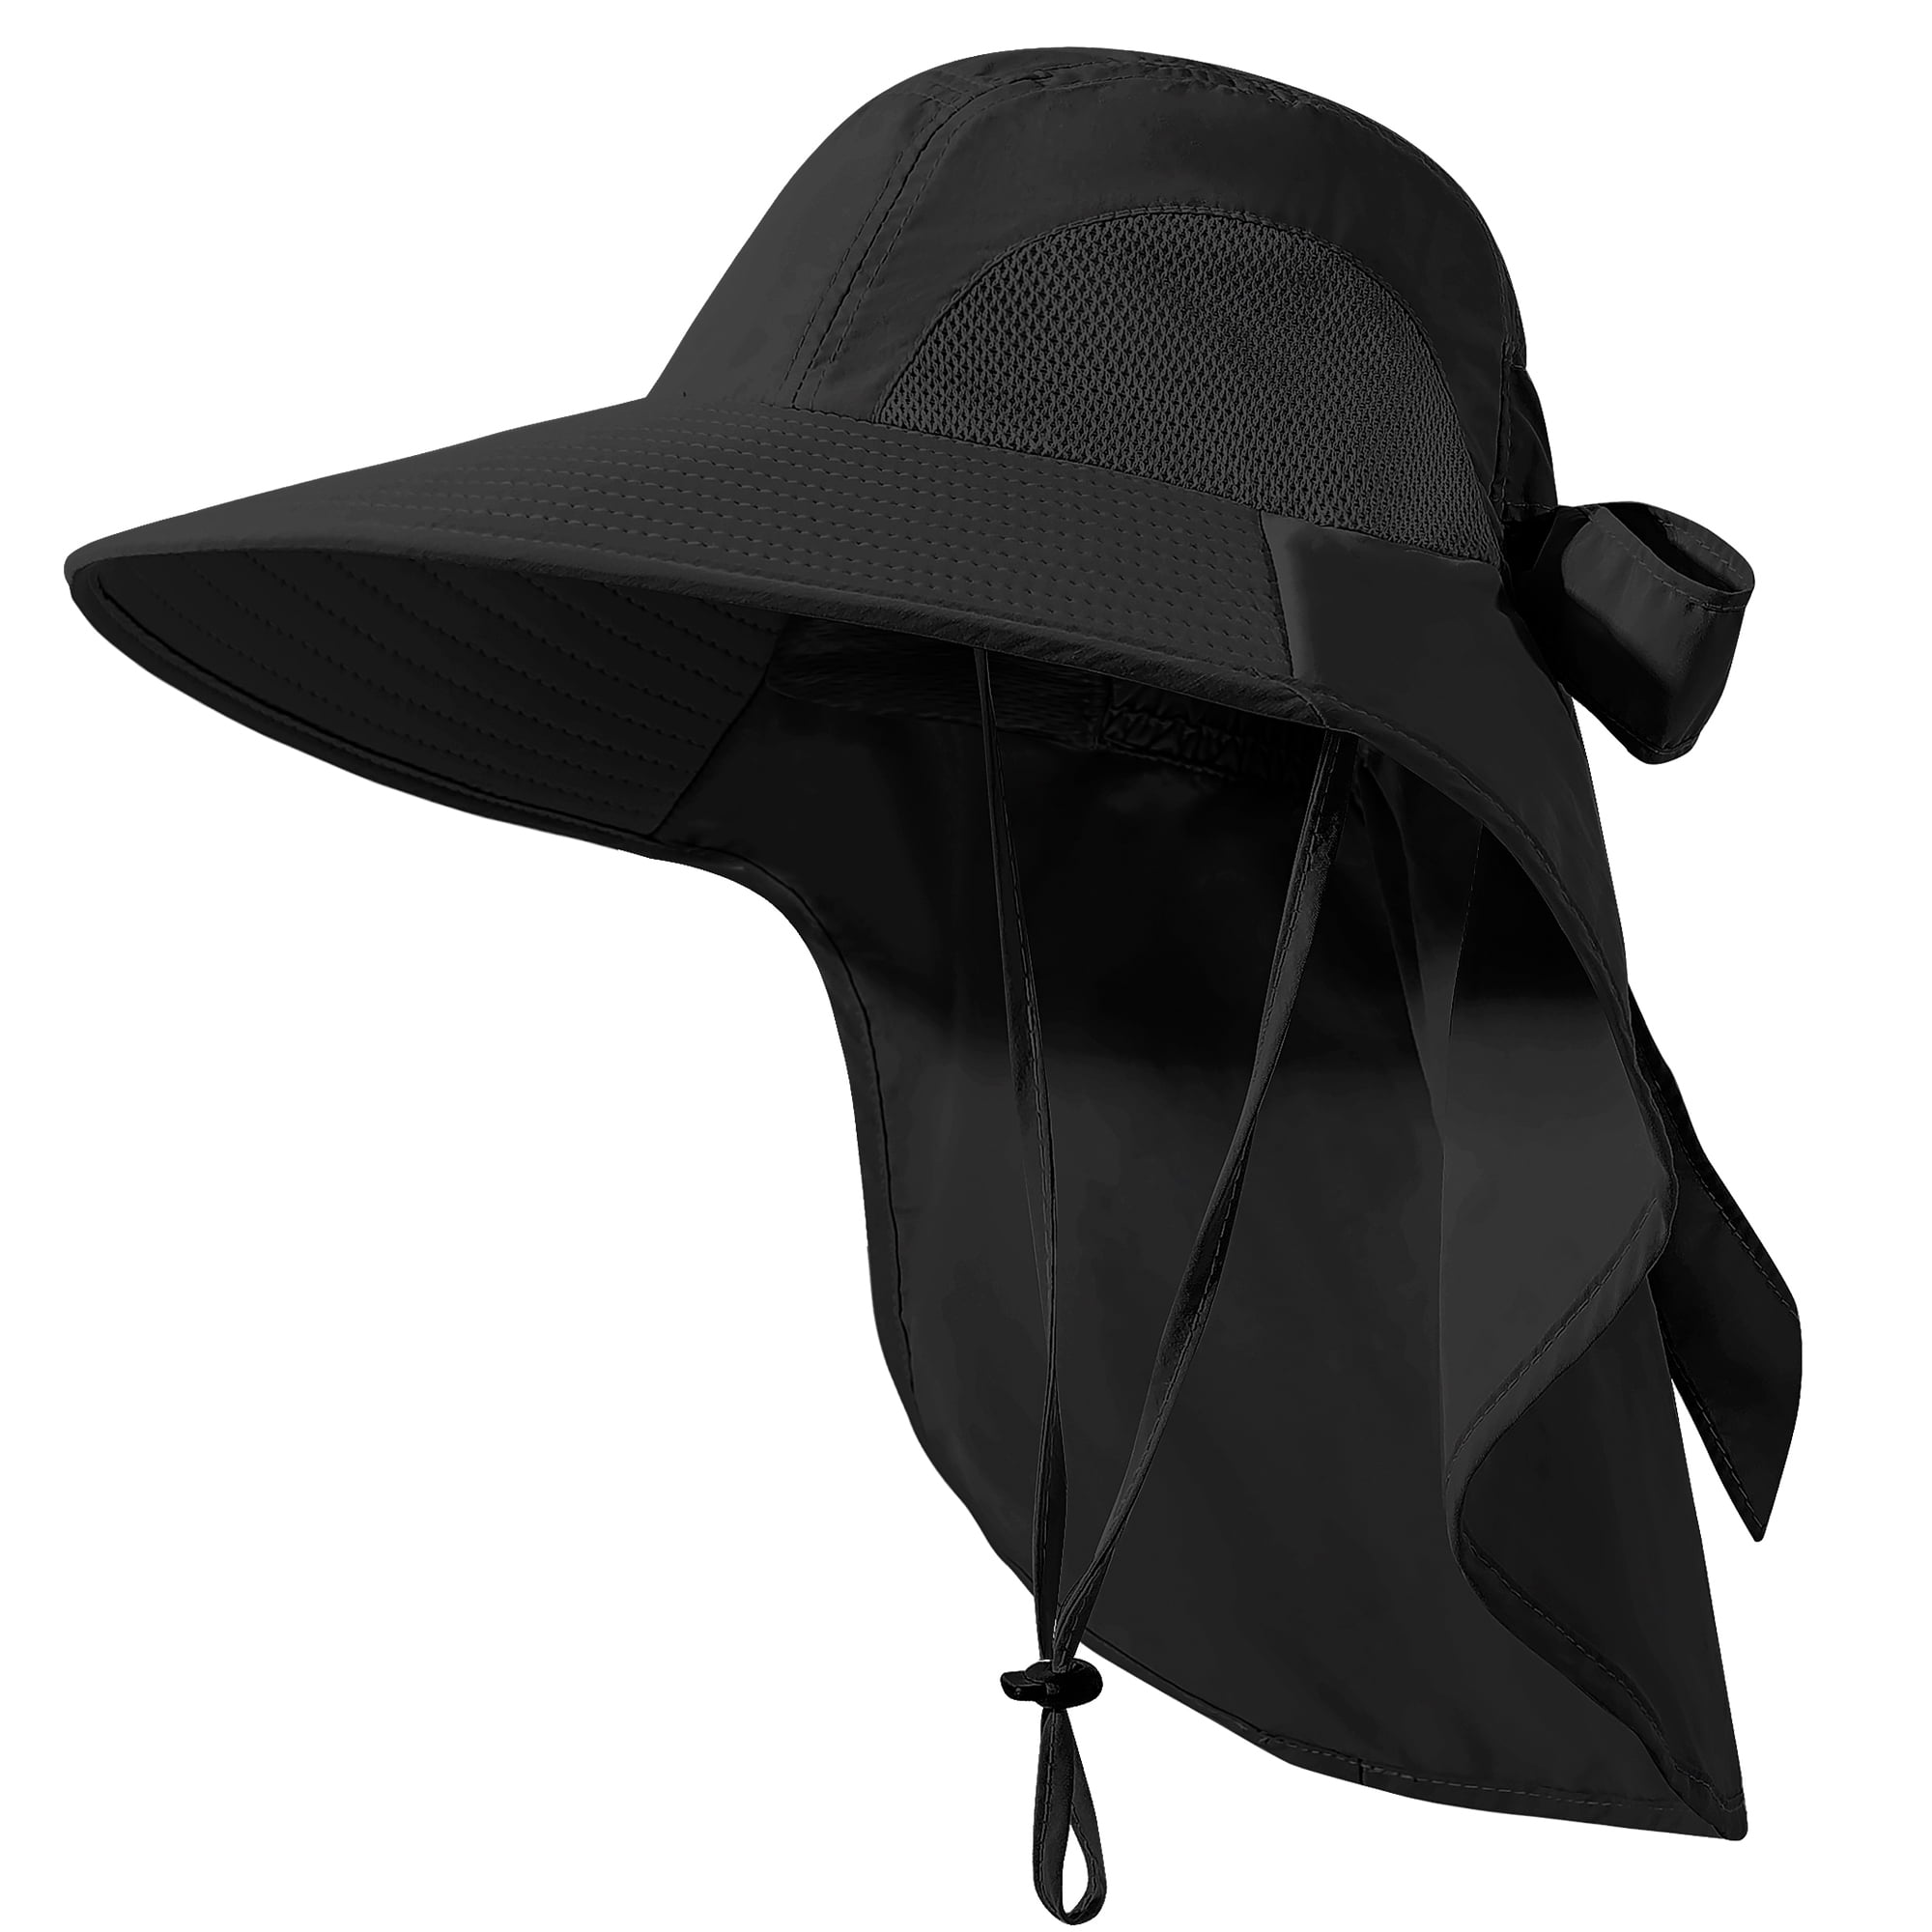 REDESS Outdoor Sun Hat for Women,Nylon UPF Protection Fishing Bucket ...